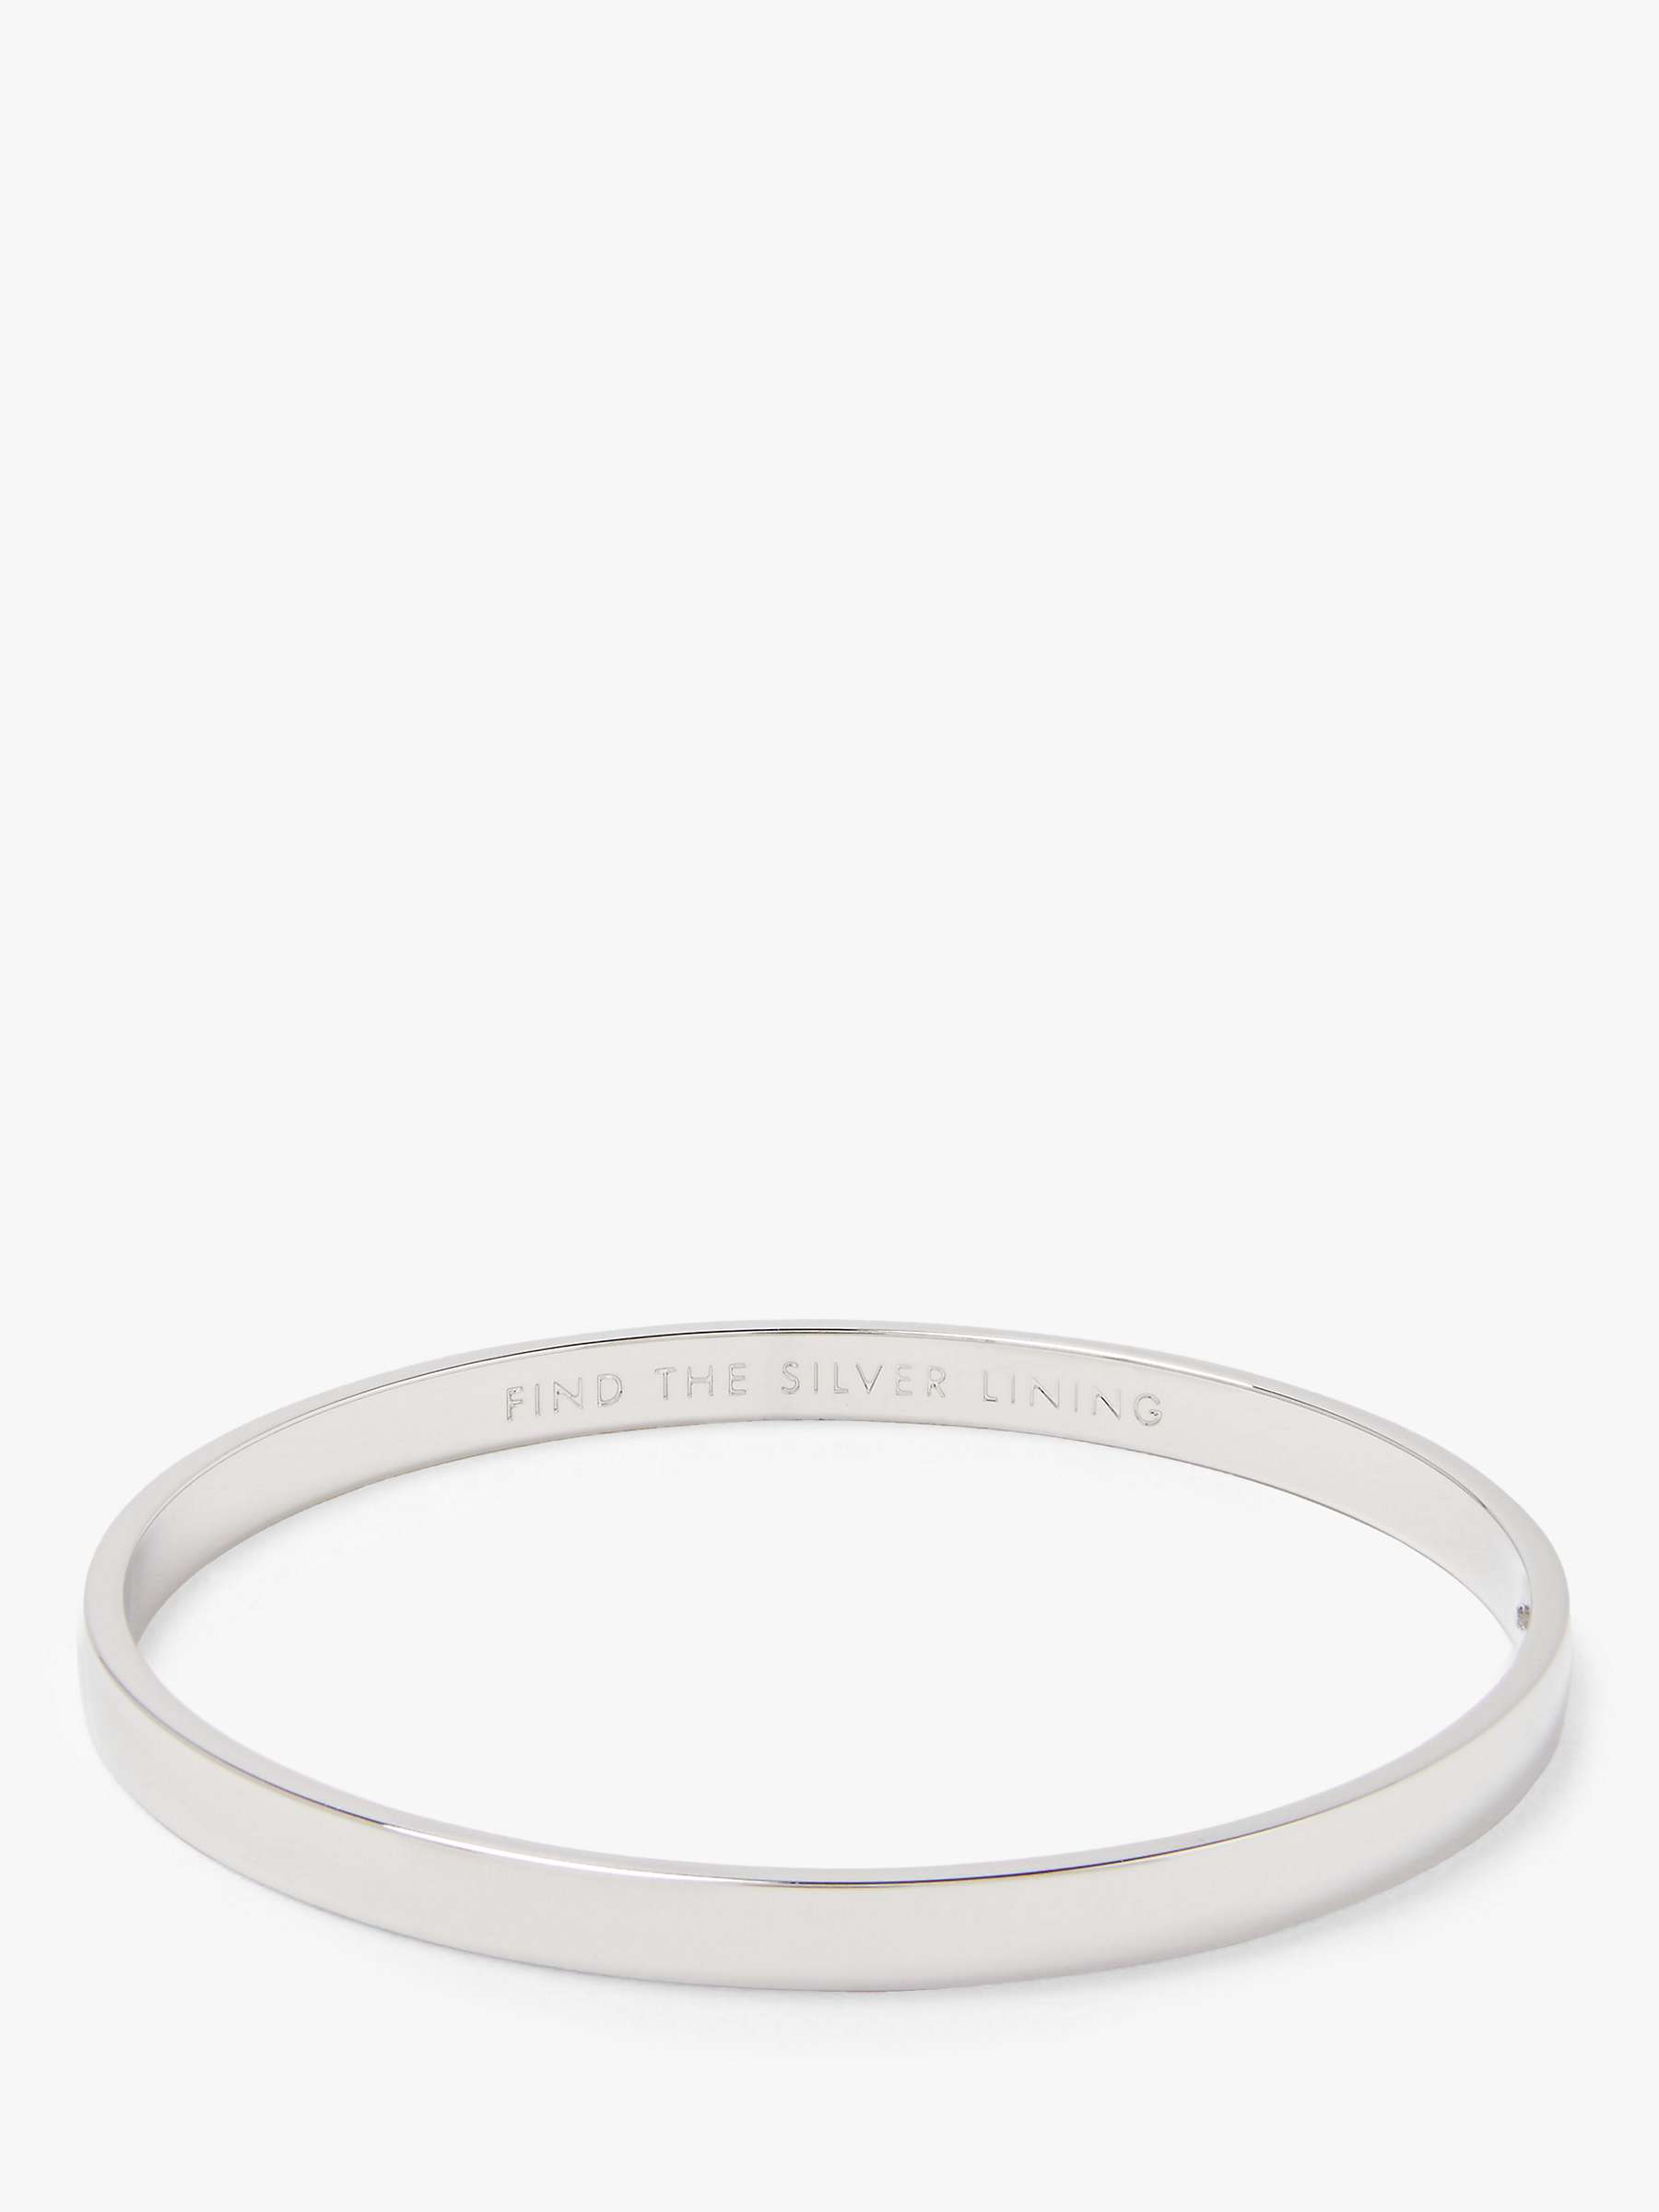 Buy kate spade new york Find The Silver Lining Bangle, Silver Online at johnlewis.com